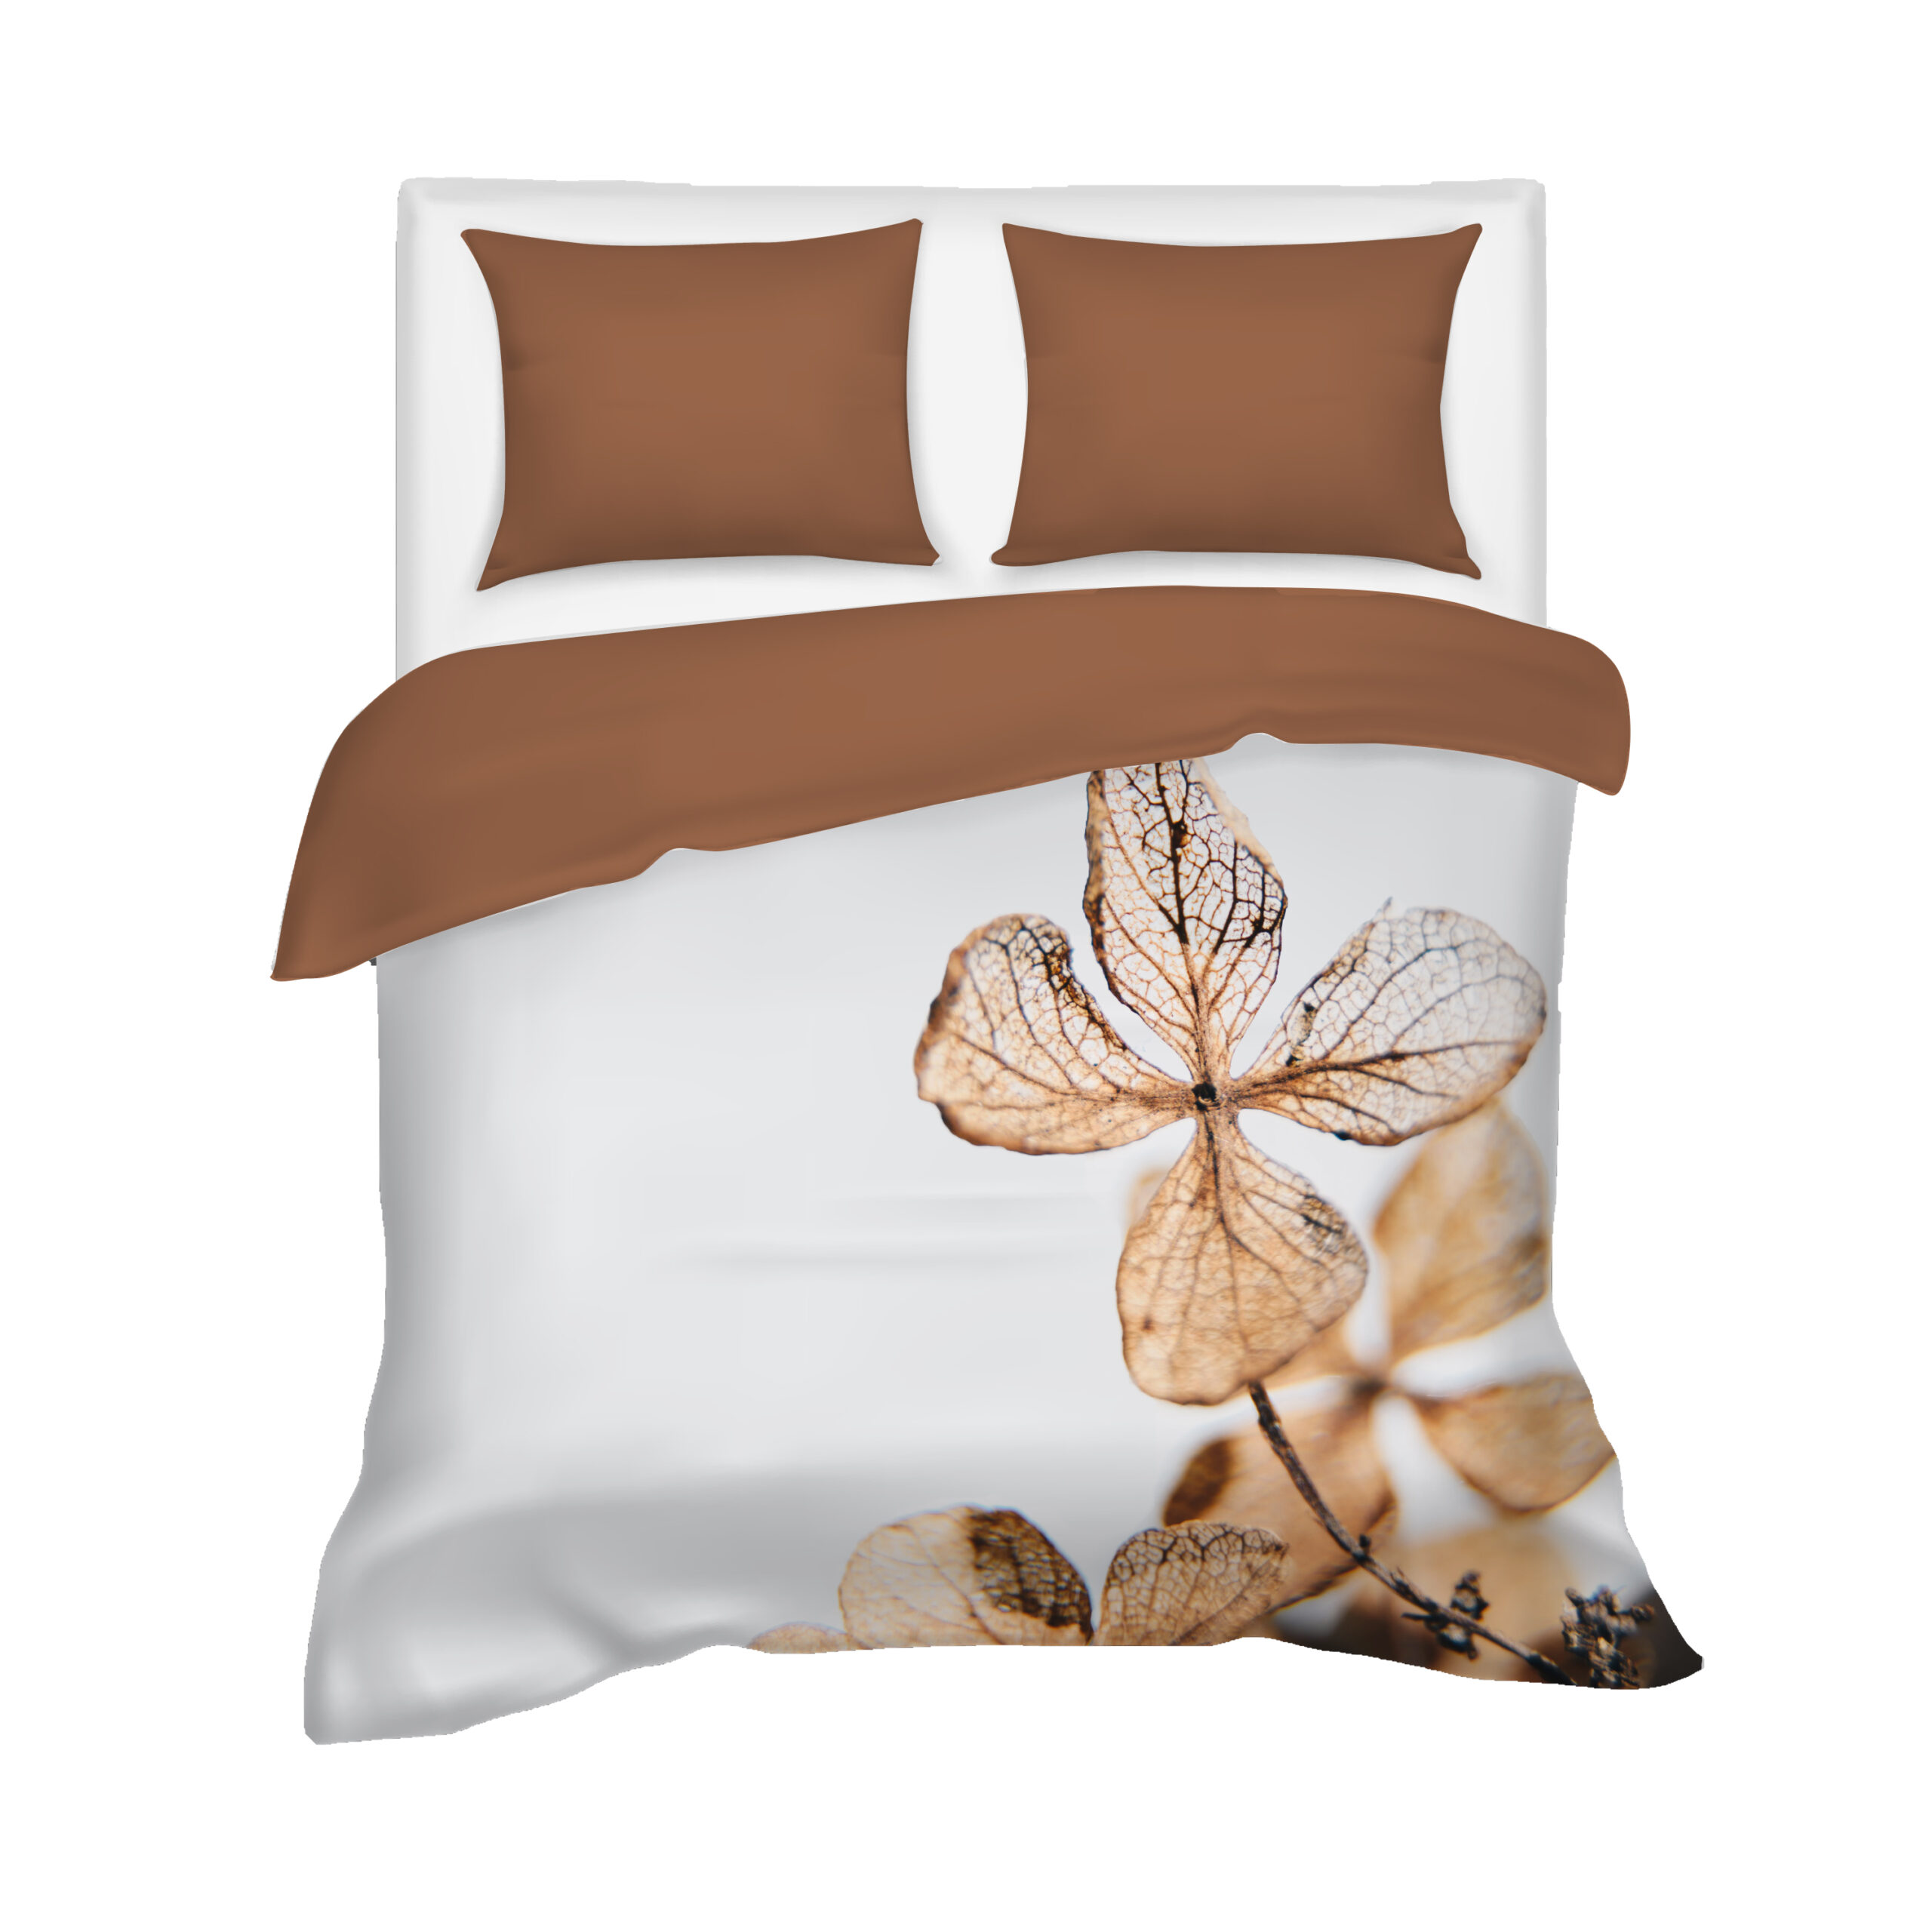 Villa Madelief 200 x 200cm Brown White Dry Flower Printed Duvet Cover with 2 Pillowcases